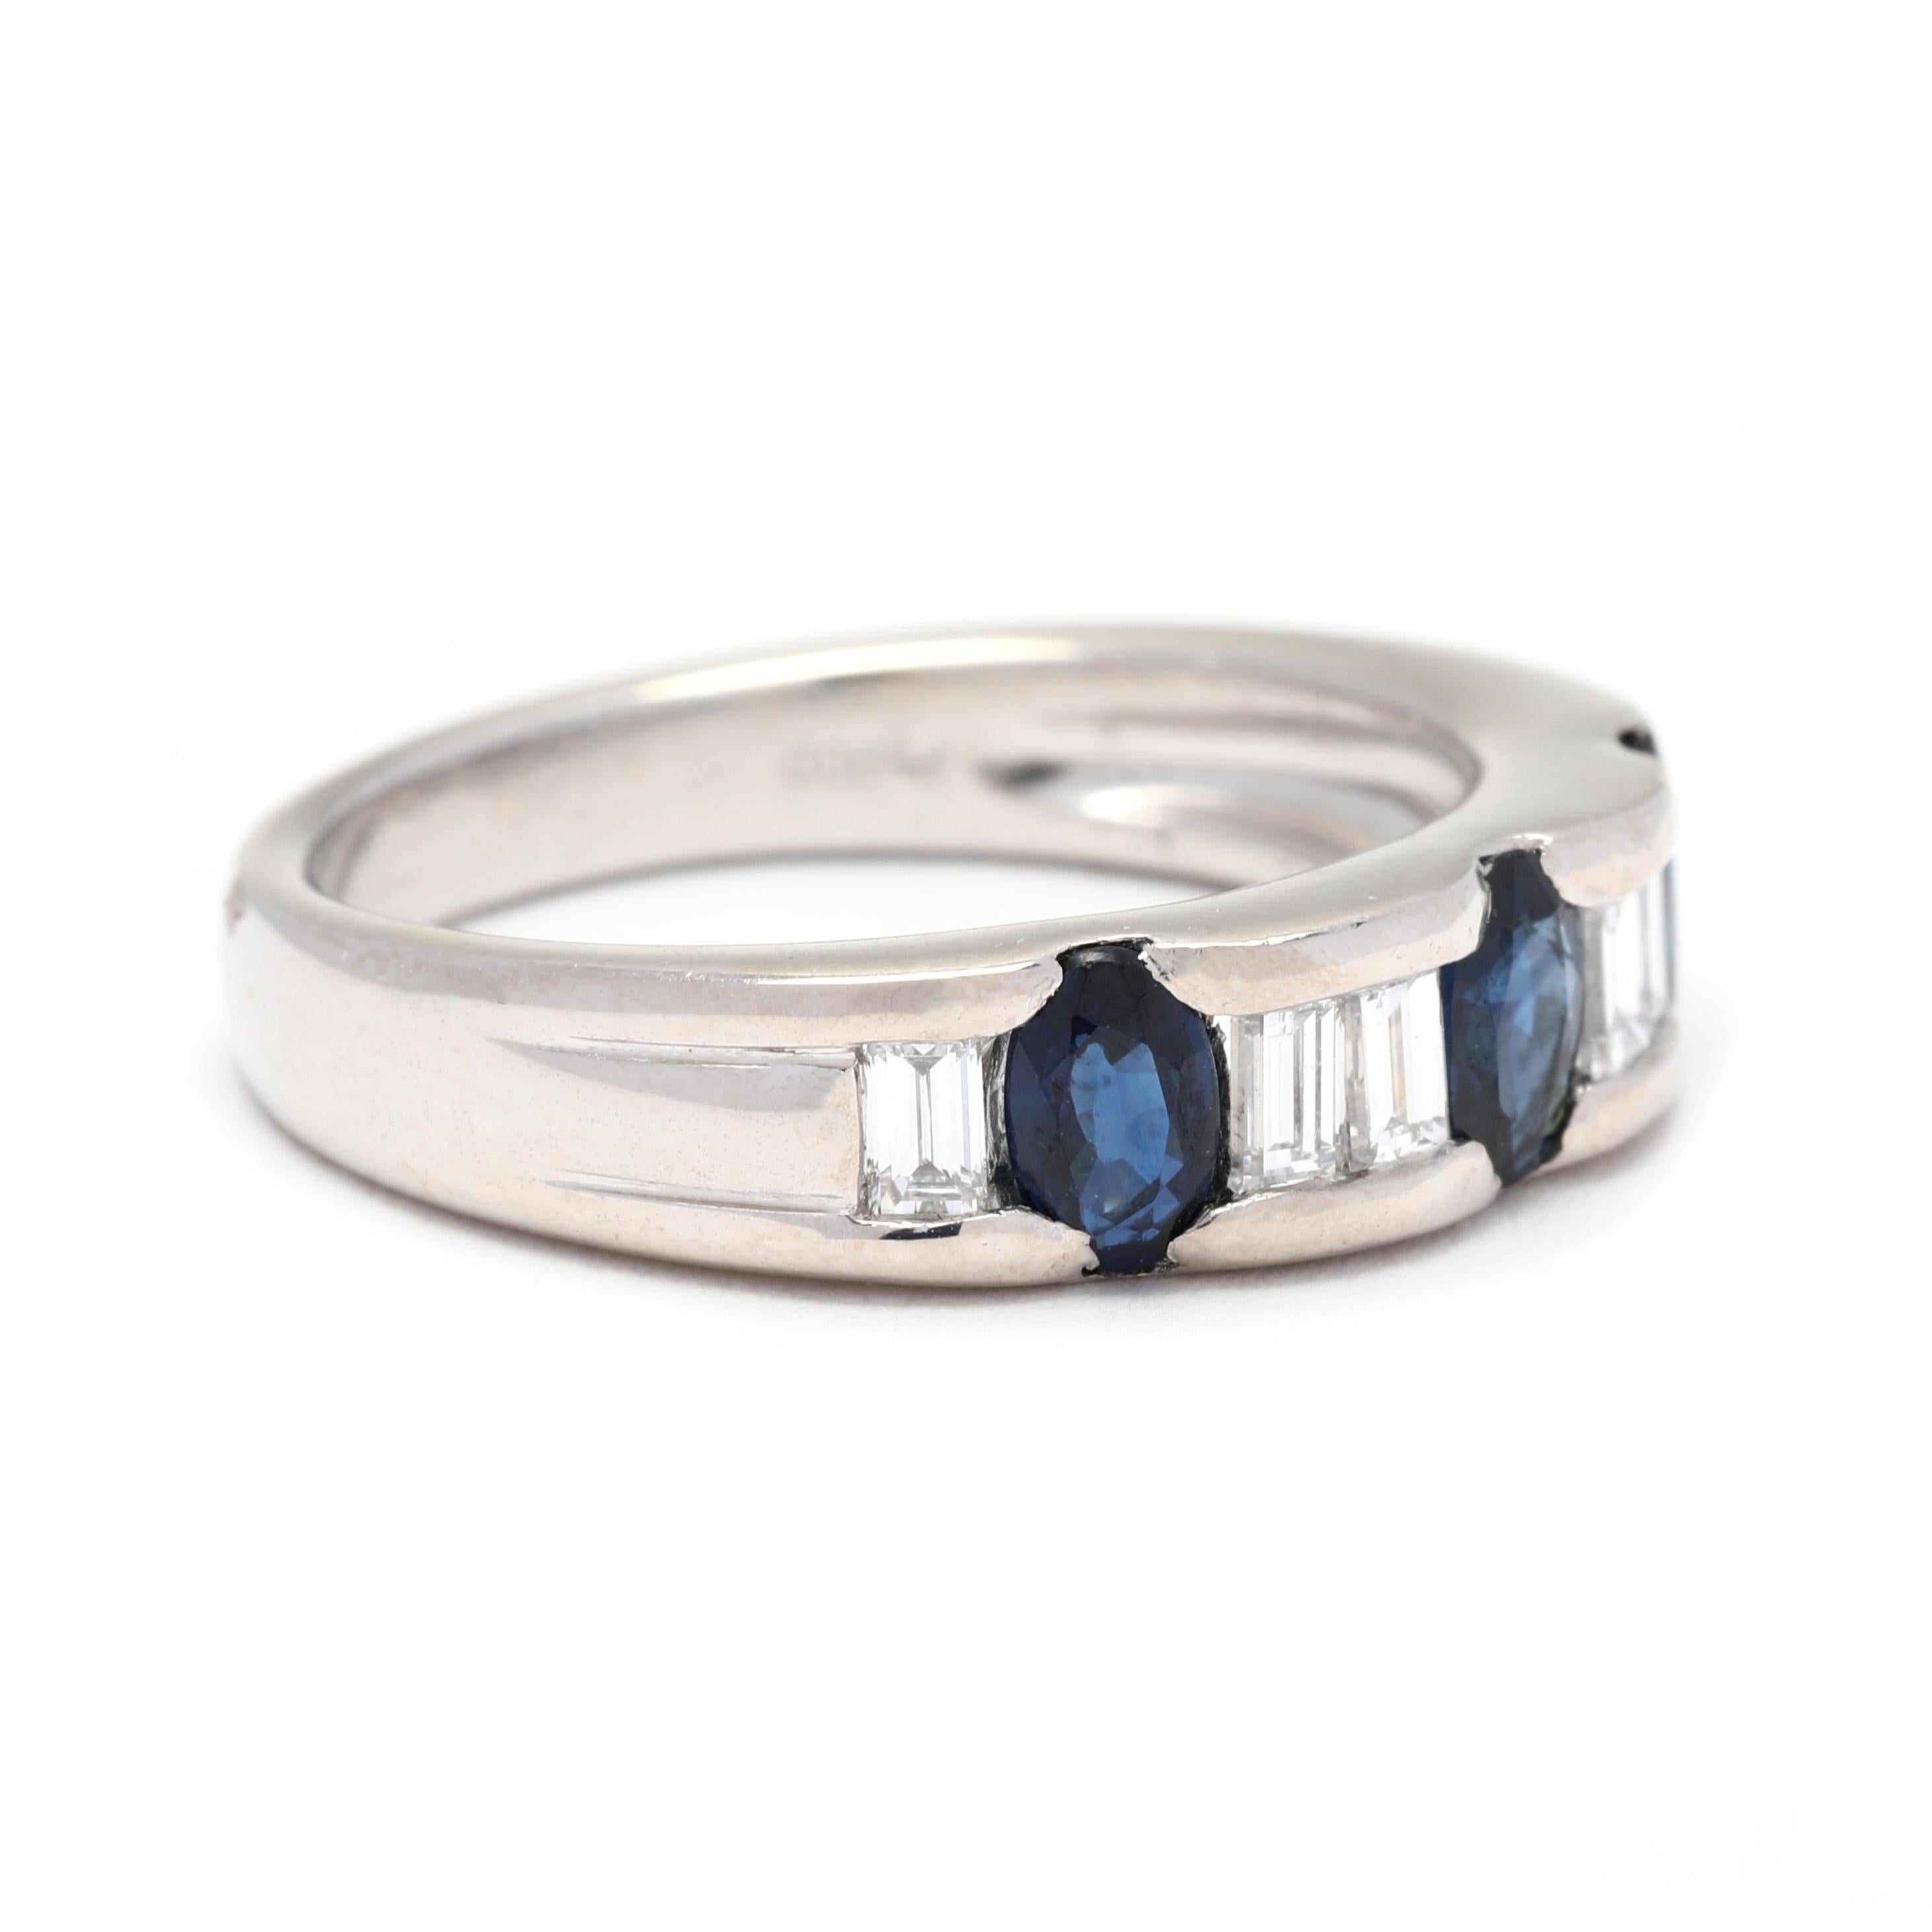 This stunning platinum band ring features a total of 1.36 carats of vibrant sapphires and sparkling diamonds. The sapphires are a beautiful deep blue color and are expertly set in between baguette cut diamonds. The ring is a size 6.25 and can be